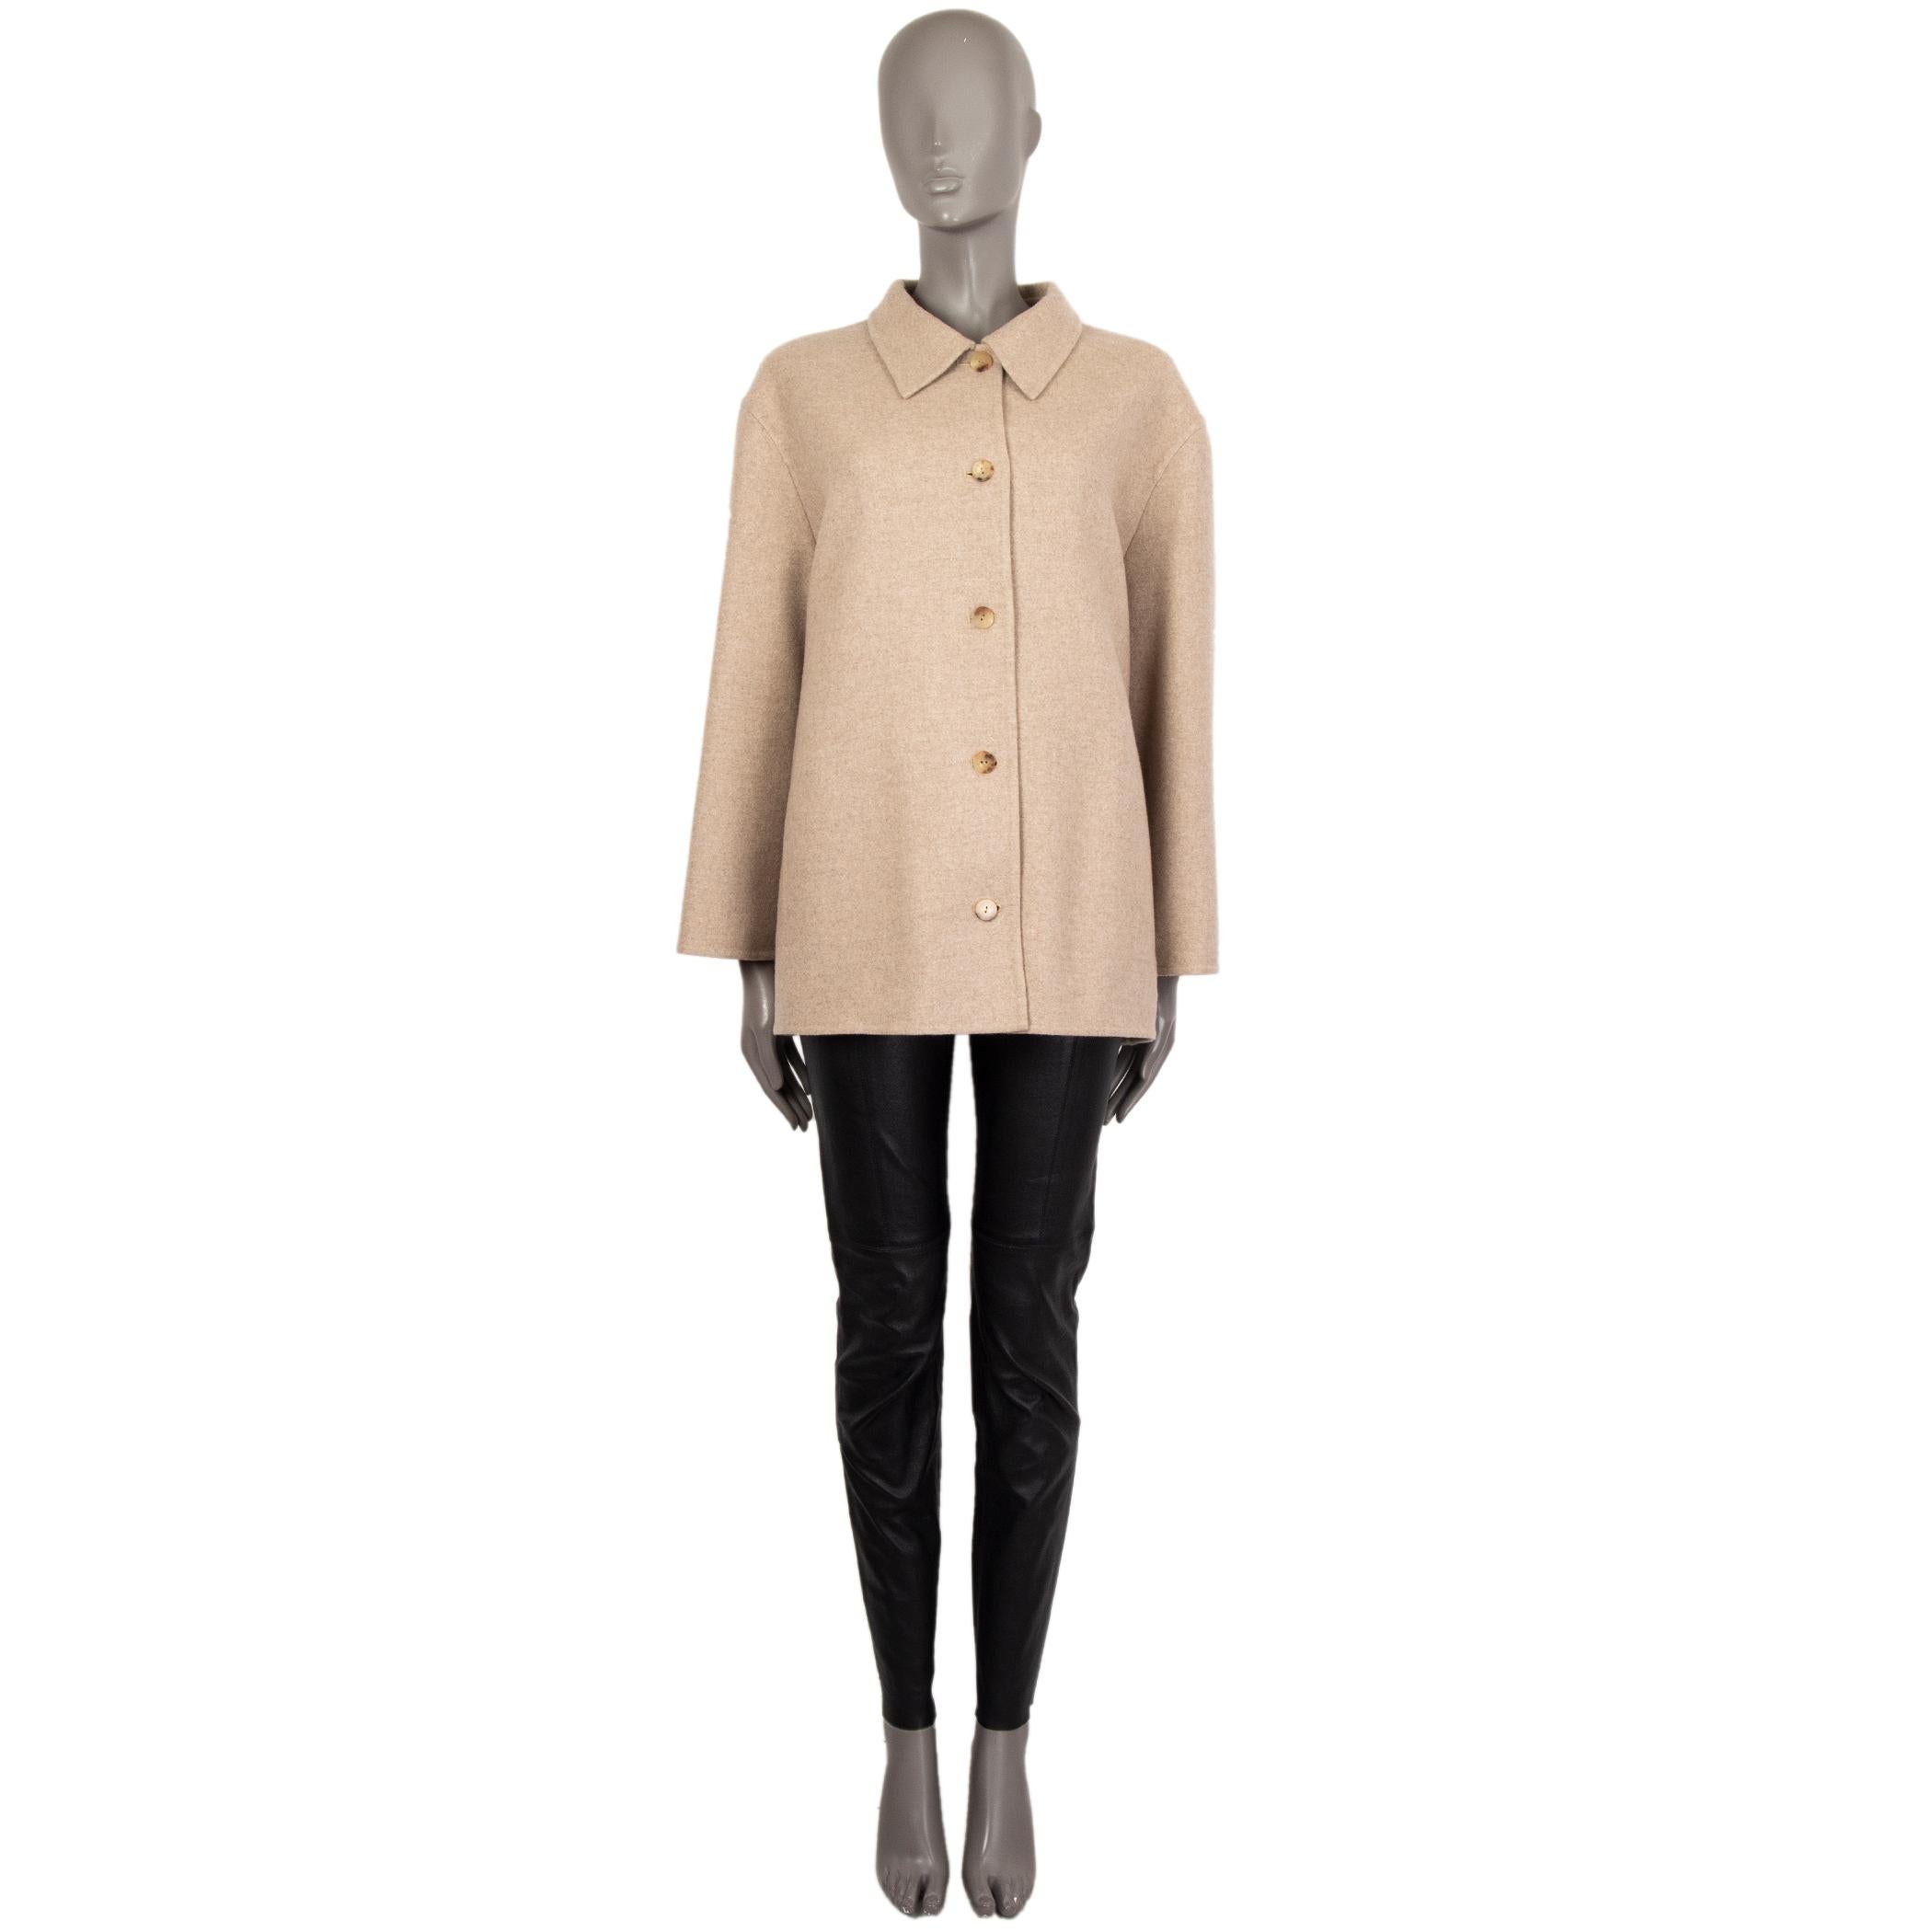 100% authentic The Row jacket in beige cashmere (100%). With flat collar and two pockets on the front. Closes with horn buttons on the front. Sleeve lined in beige cupro (100%). Has been worn and is in excellent condition. 

Measurements
Tag